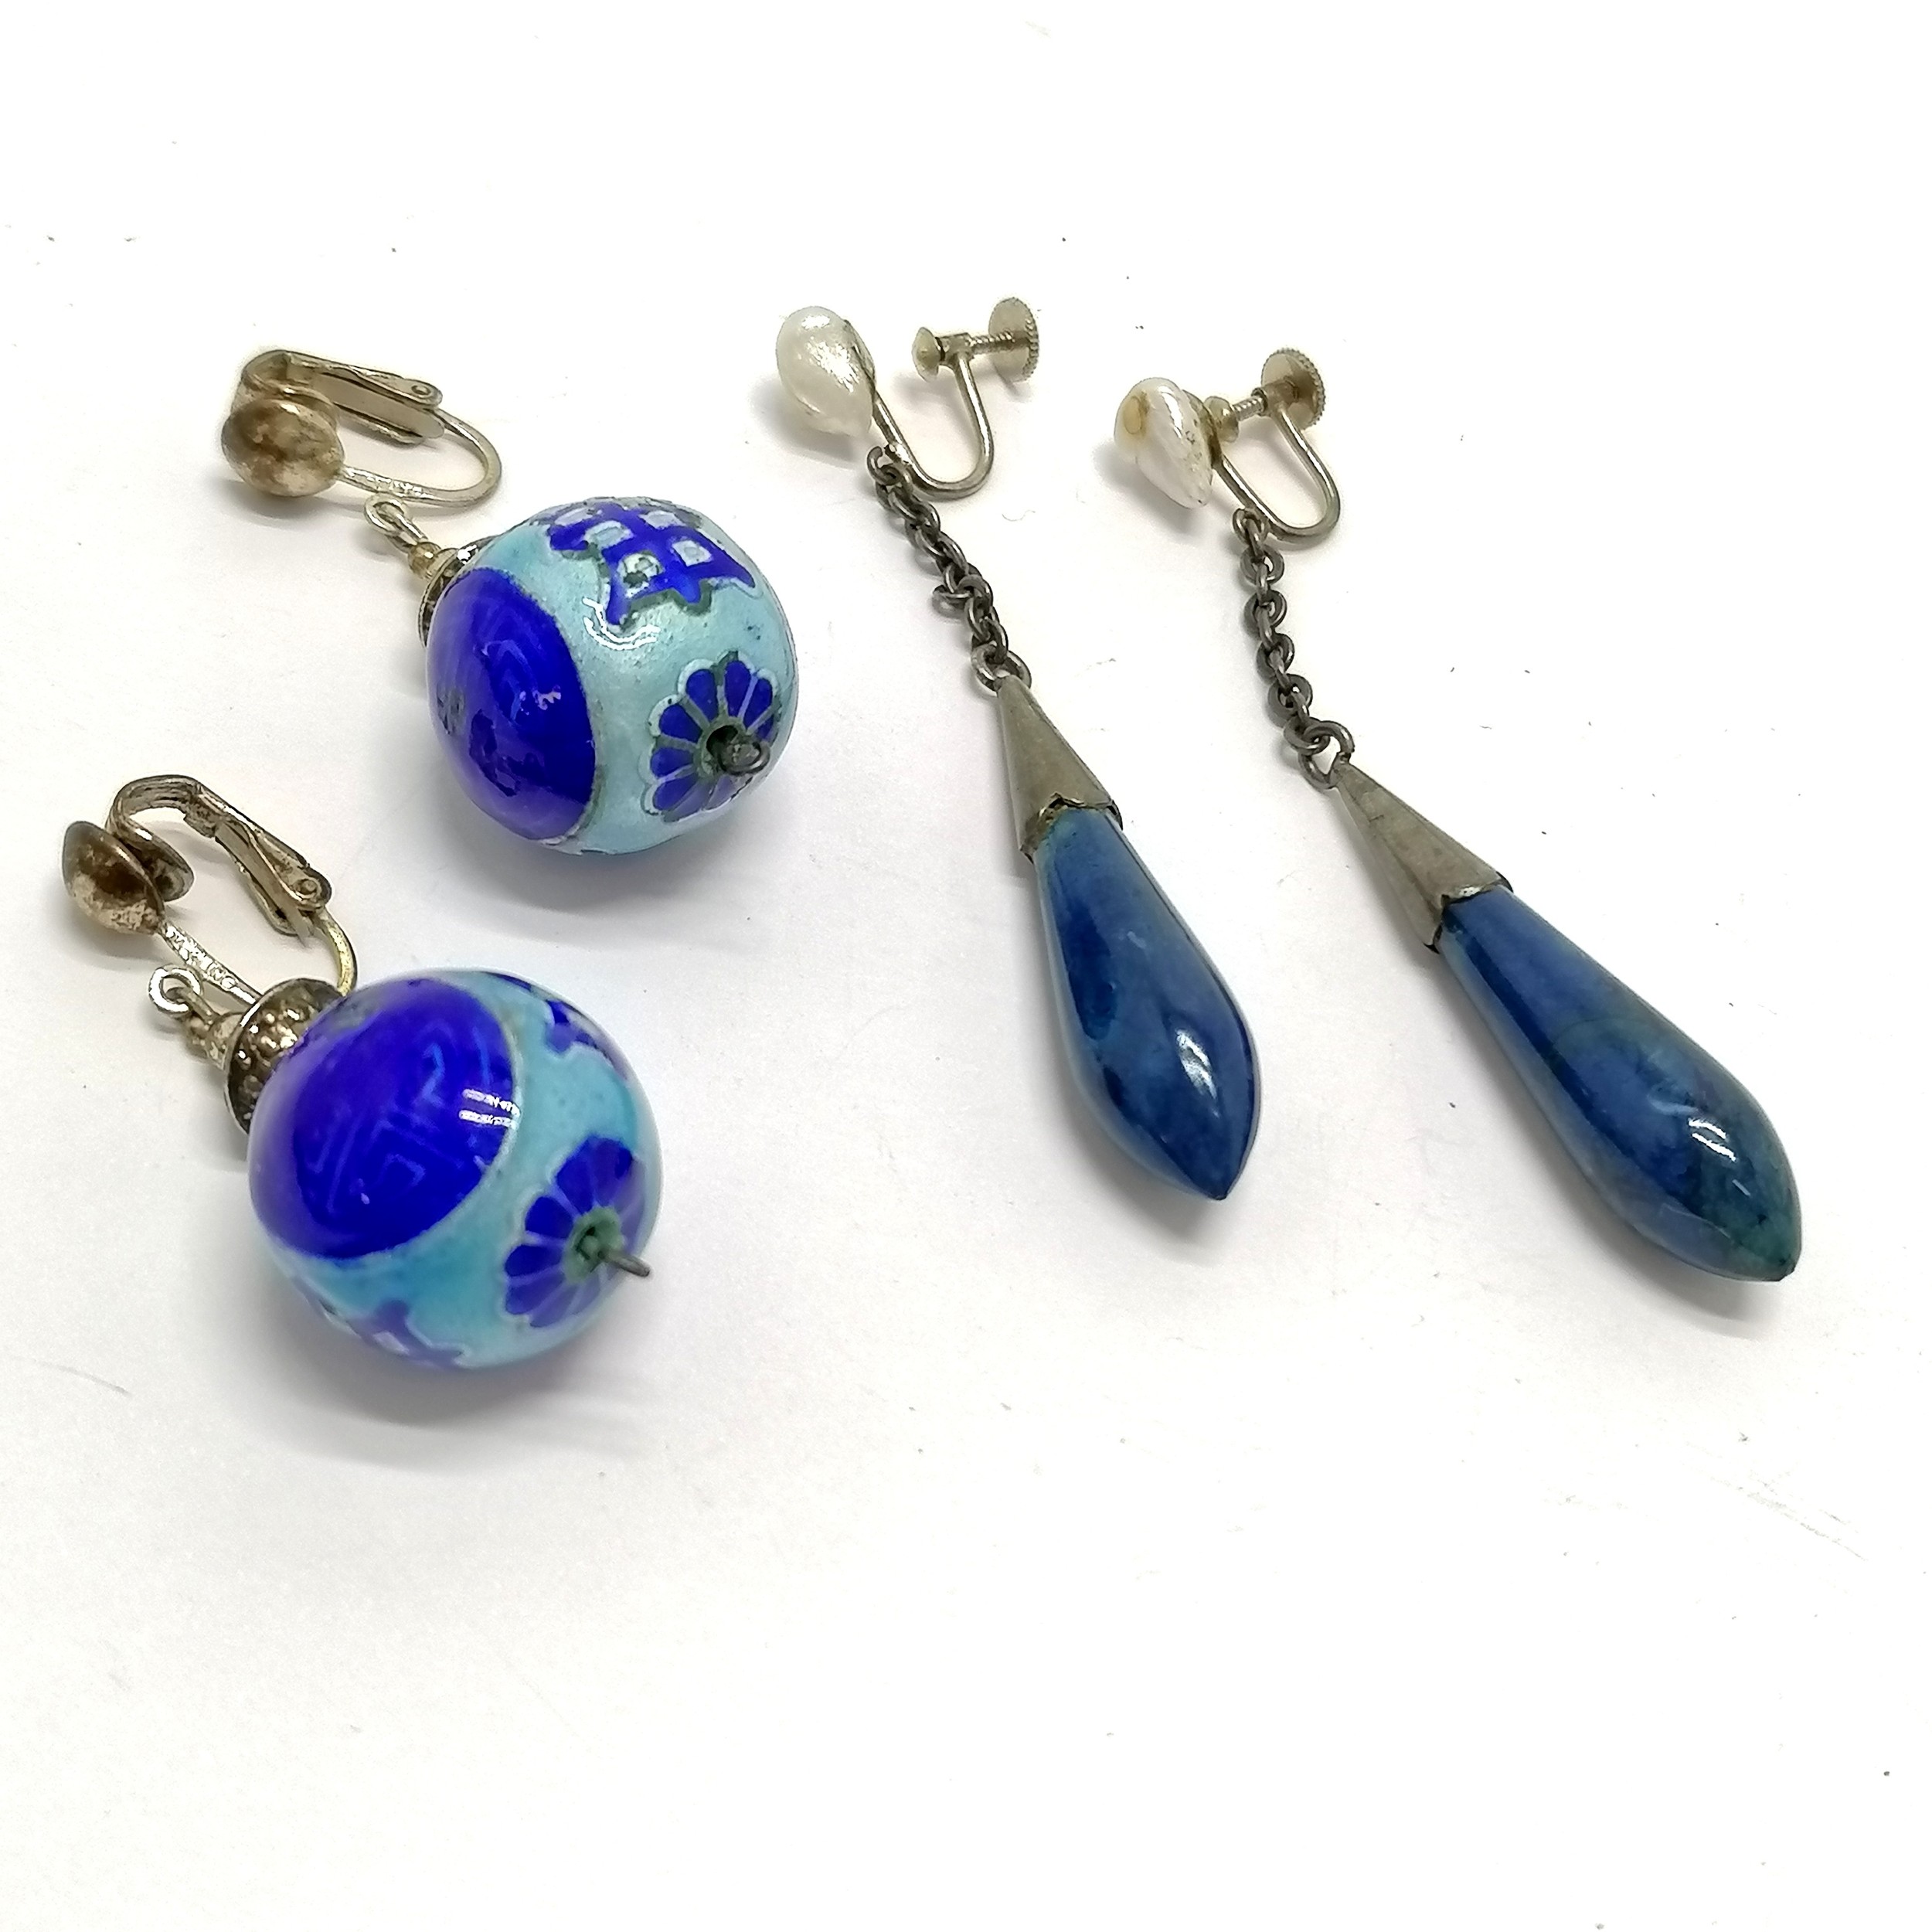 Antique 14ct marked white gold lapis pendant drop earrings with natural pearl detail (6cm drop & 8.